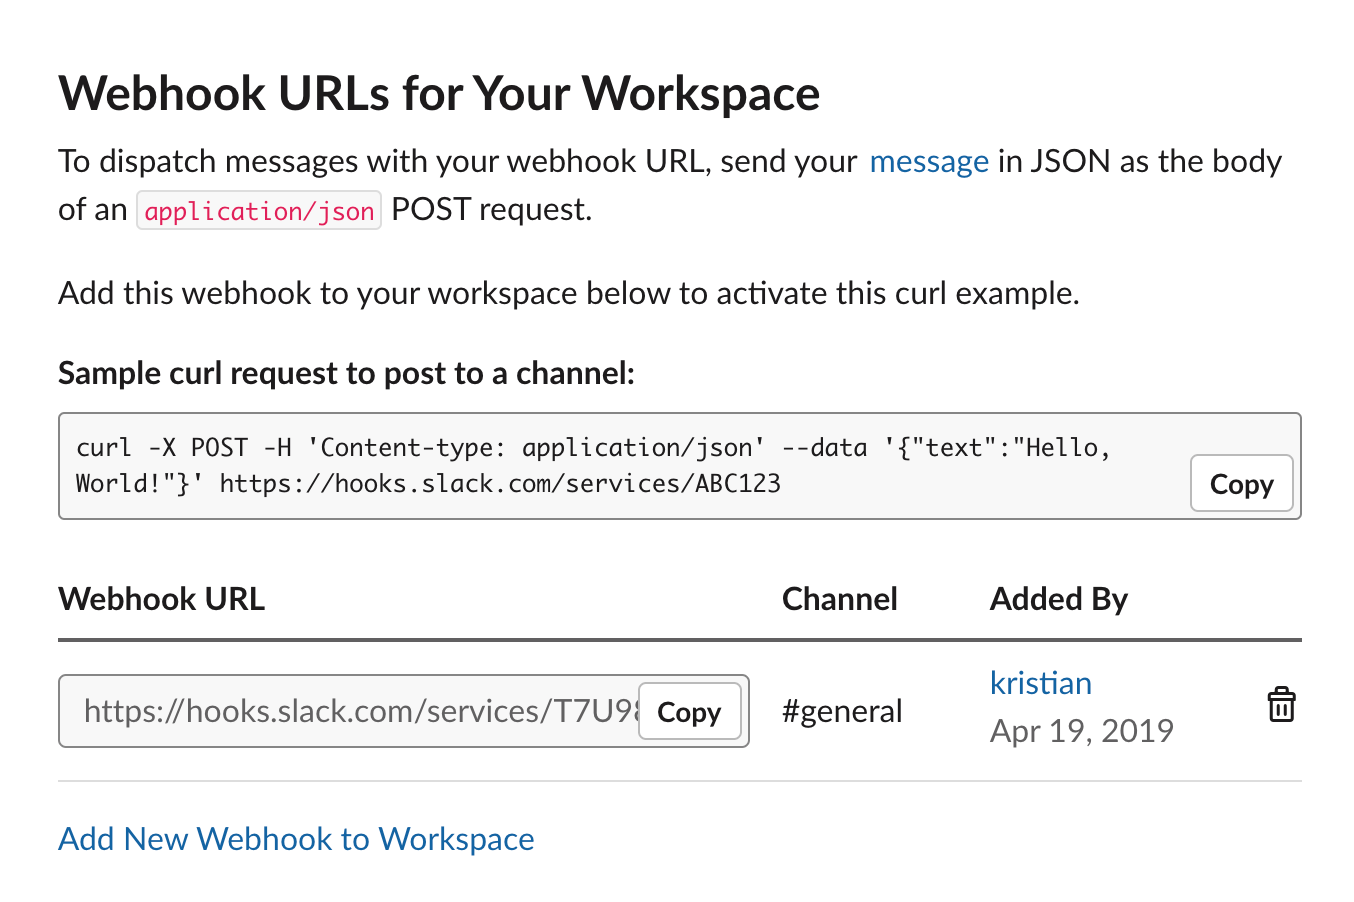 Select Add New Webhook to Workspace to add a new Webhook URL in Slack&rsquo;s dashboard